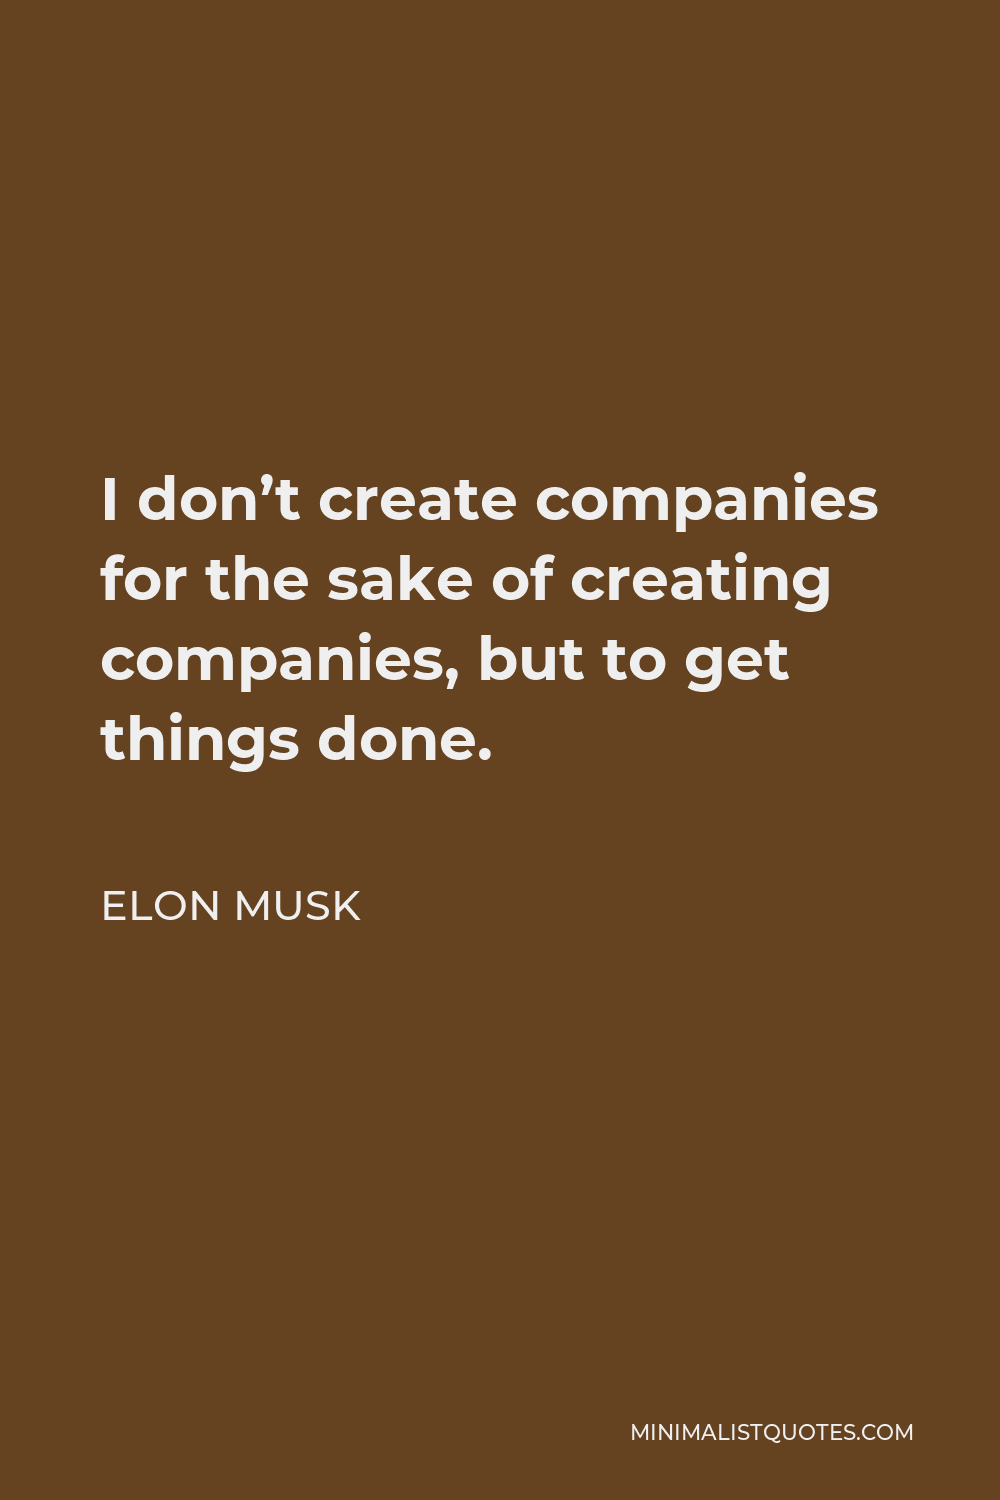 Elon Musk Quote - I don’t create companies for the sake of creating companies, but to get things done.